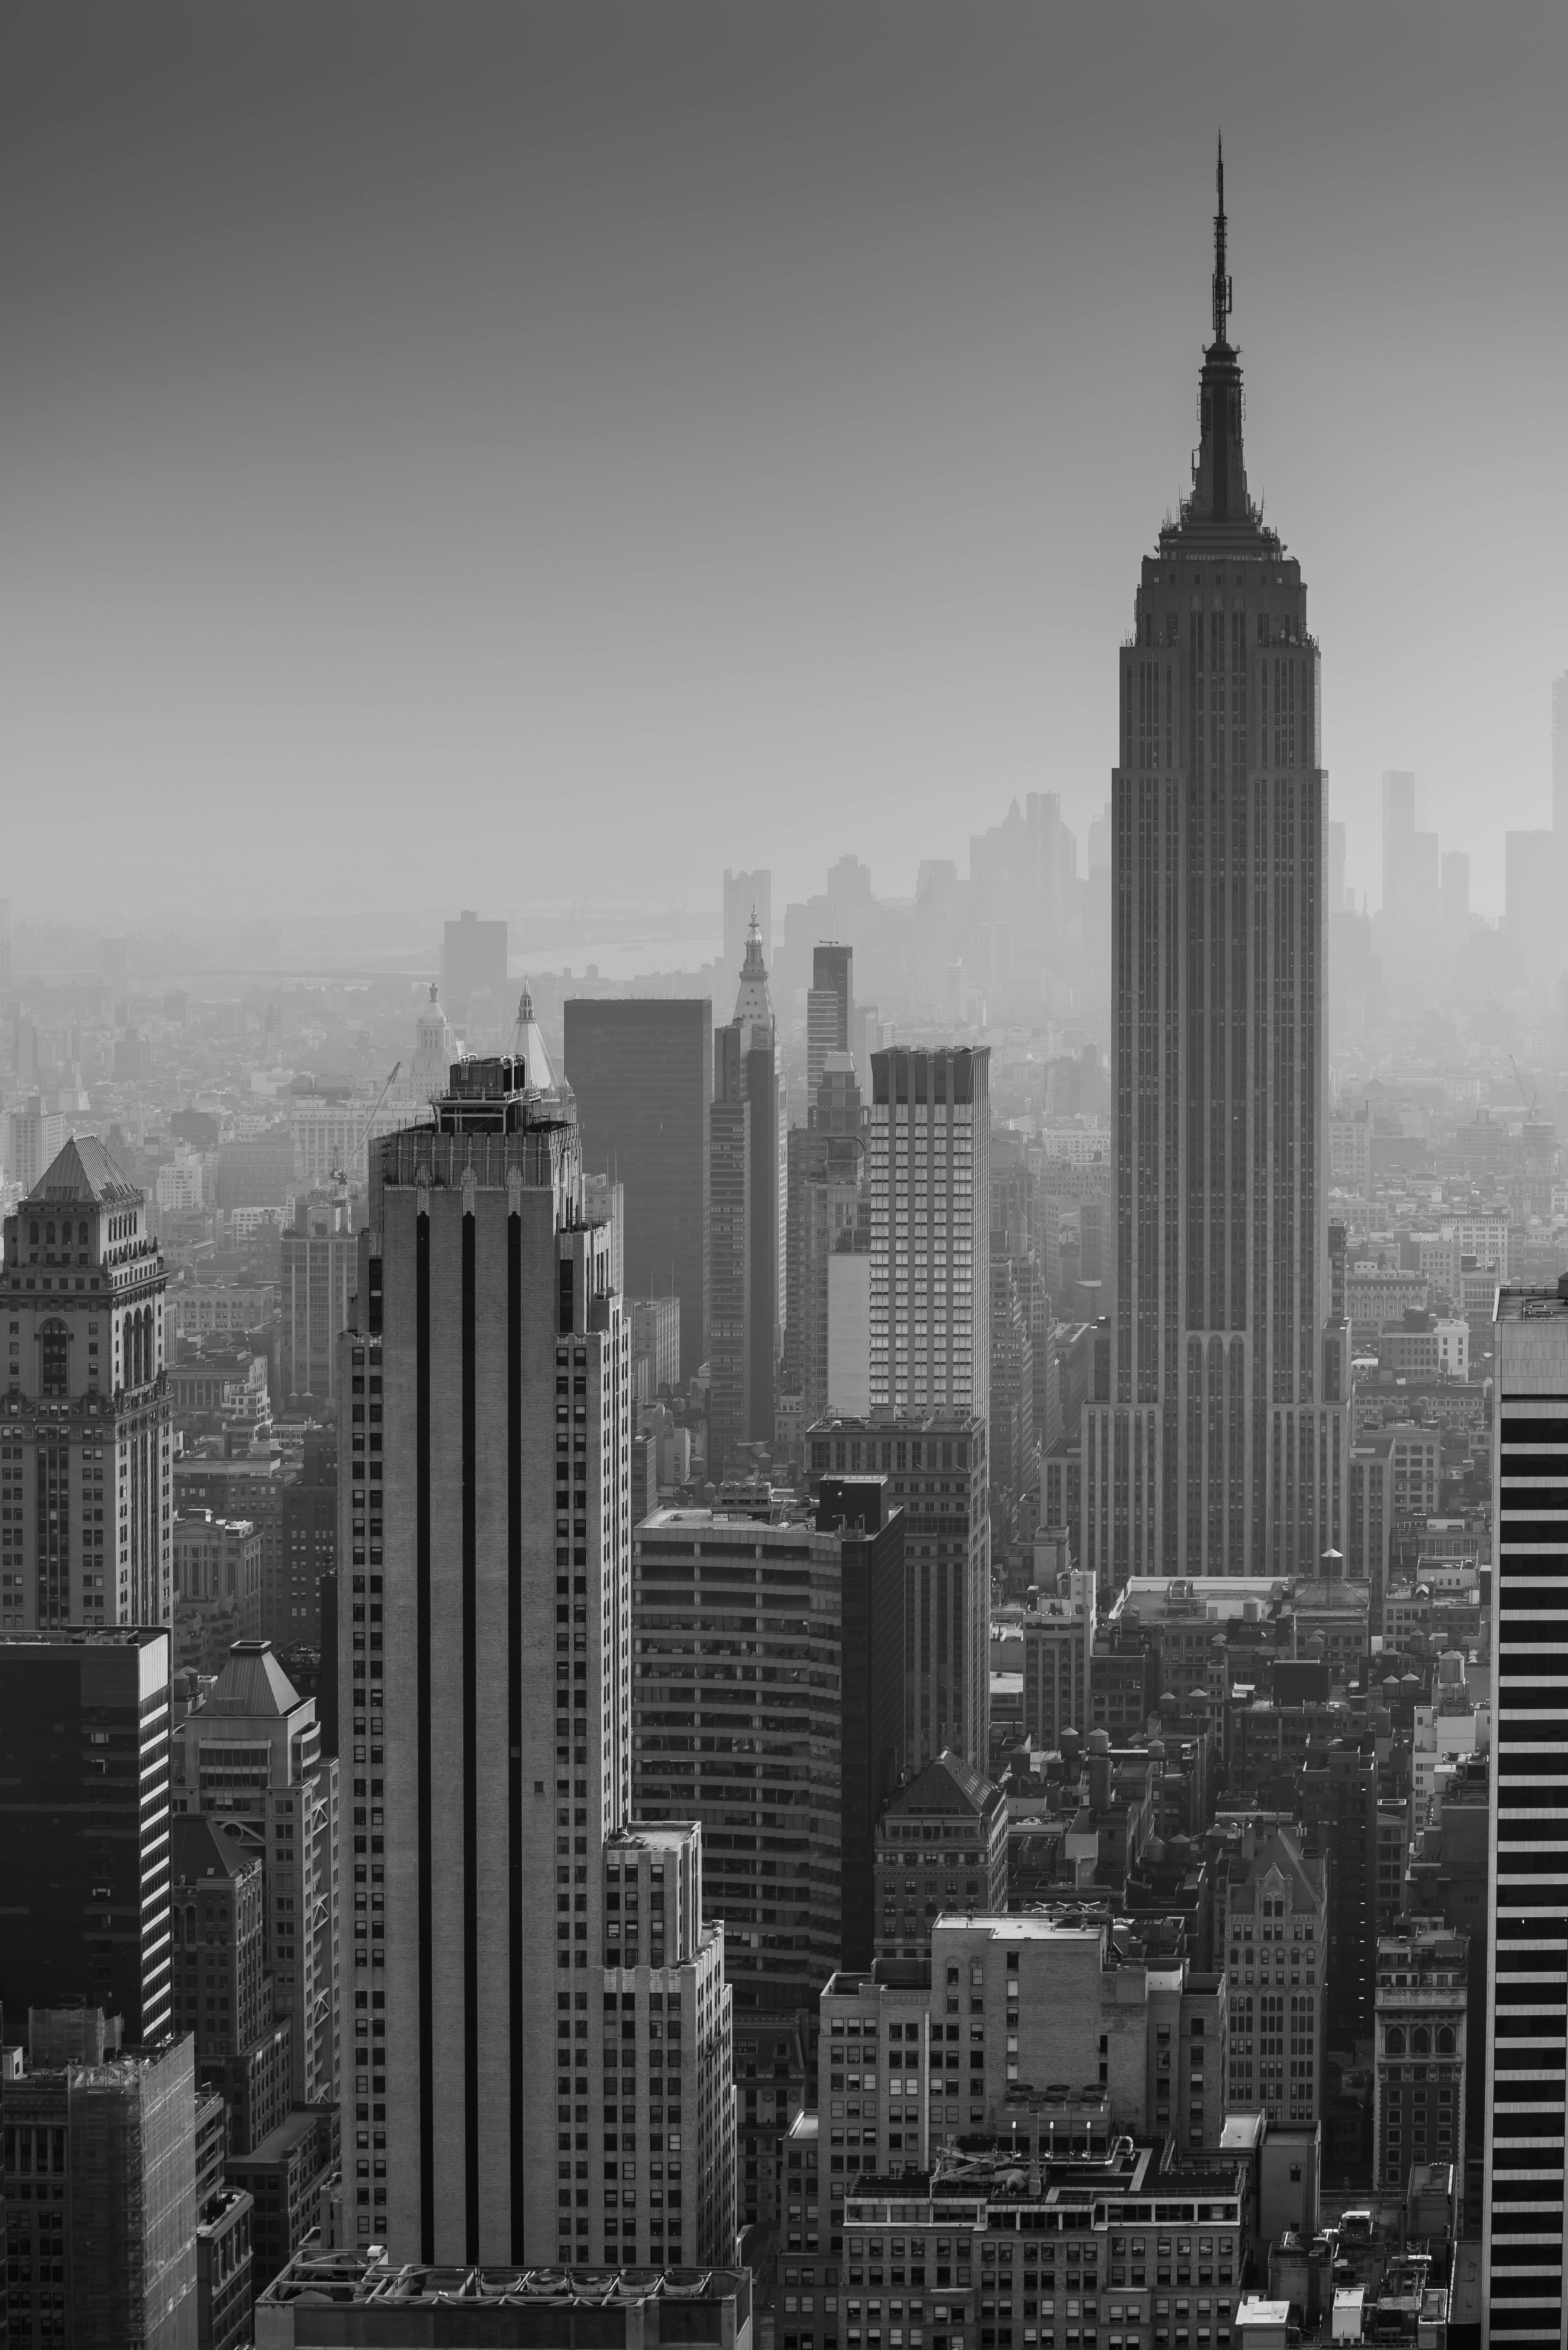 city, skyscrapers, bw, chb, architecture, cities, building, view from above, new york